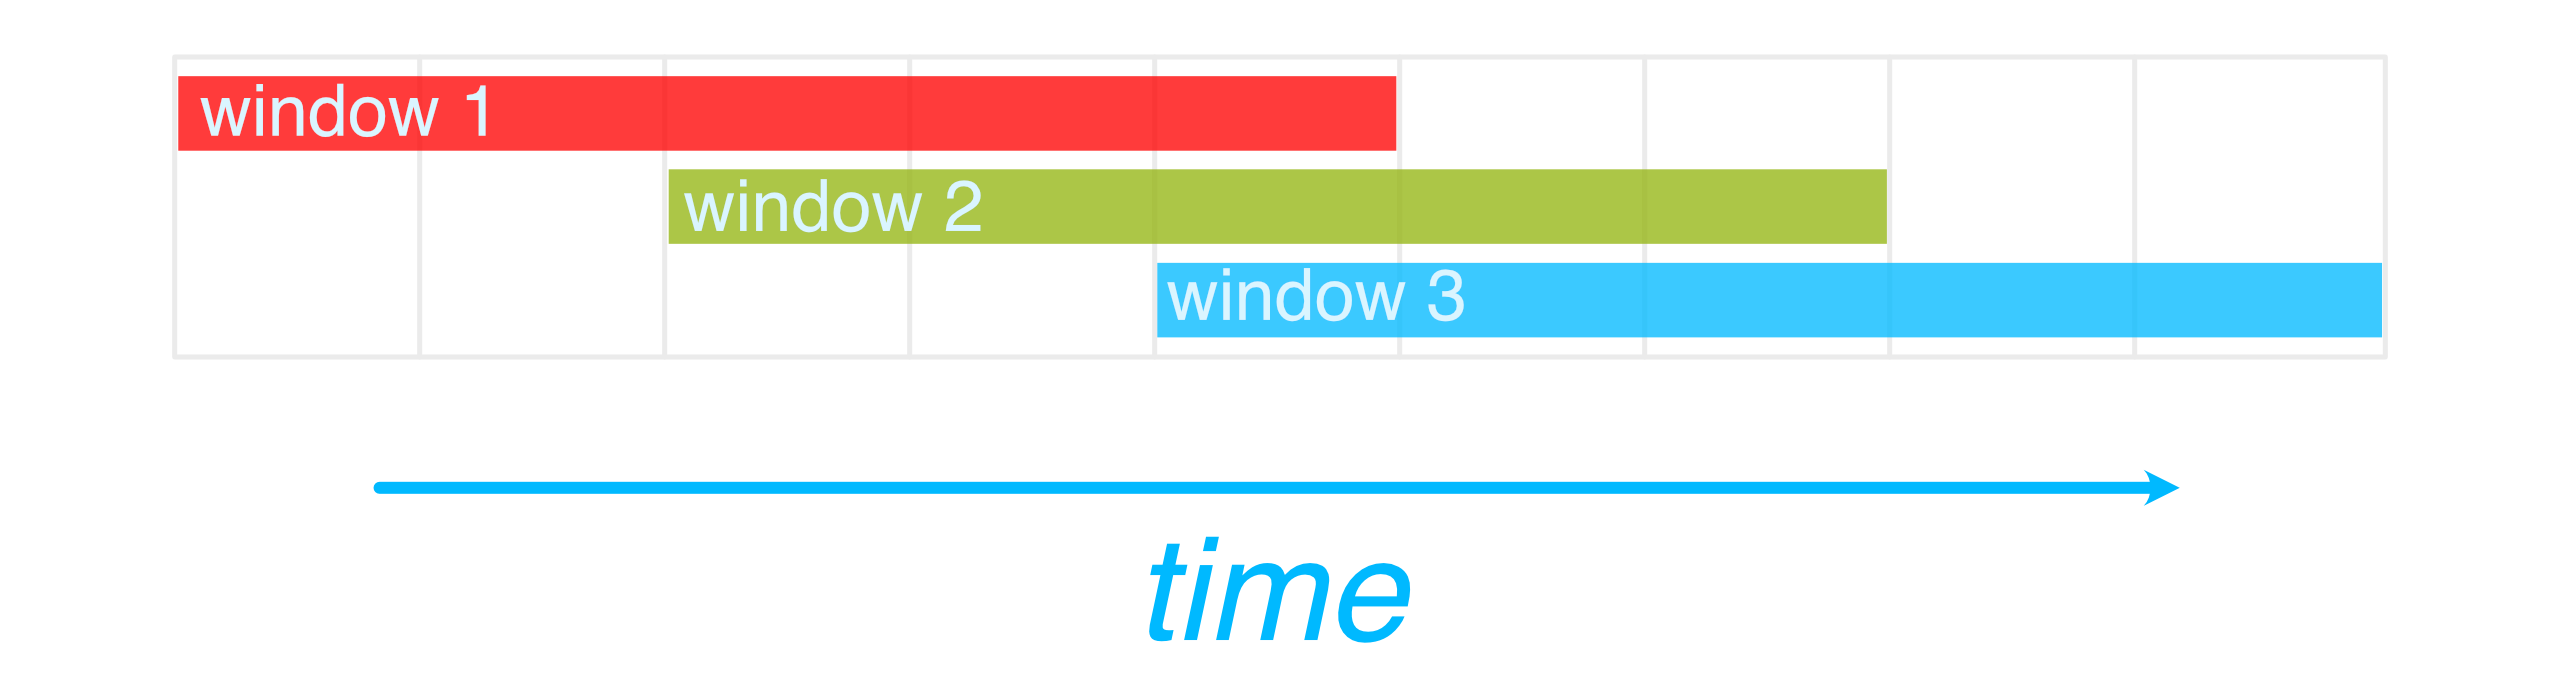 A graph showing a sliding window